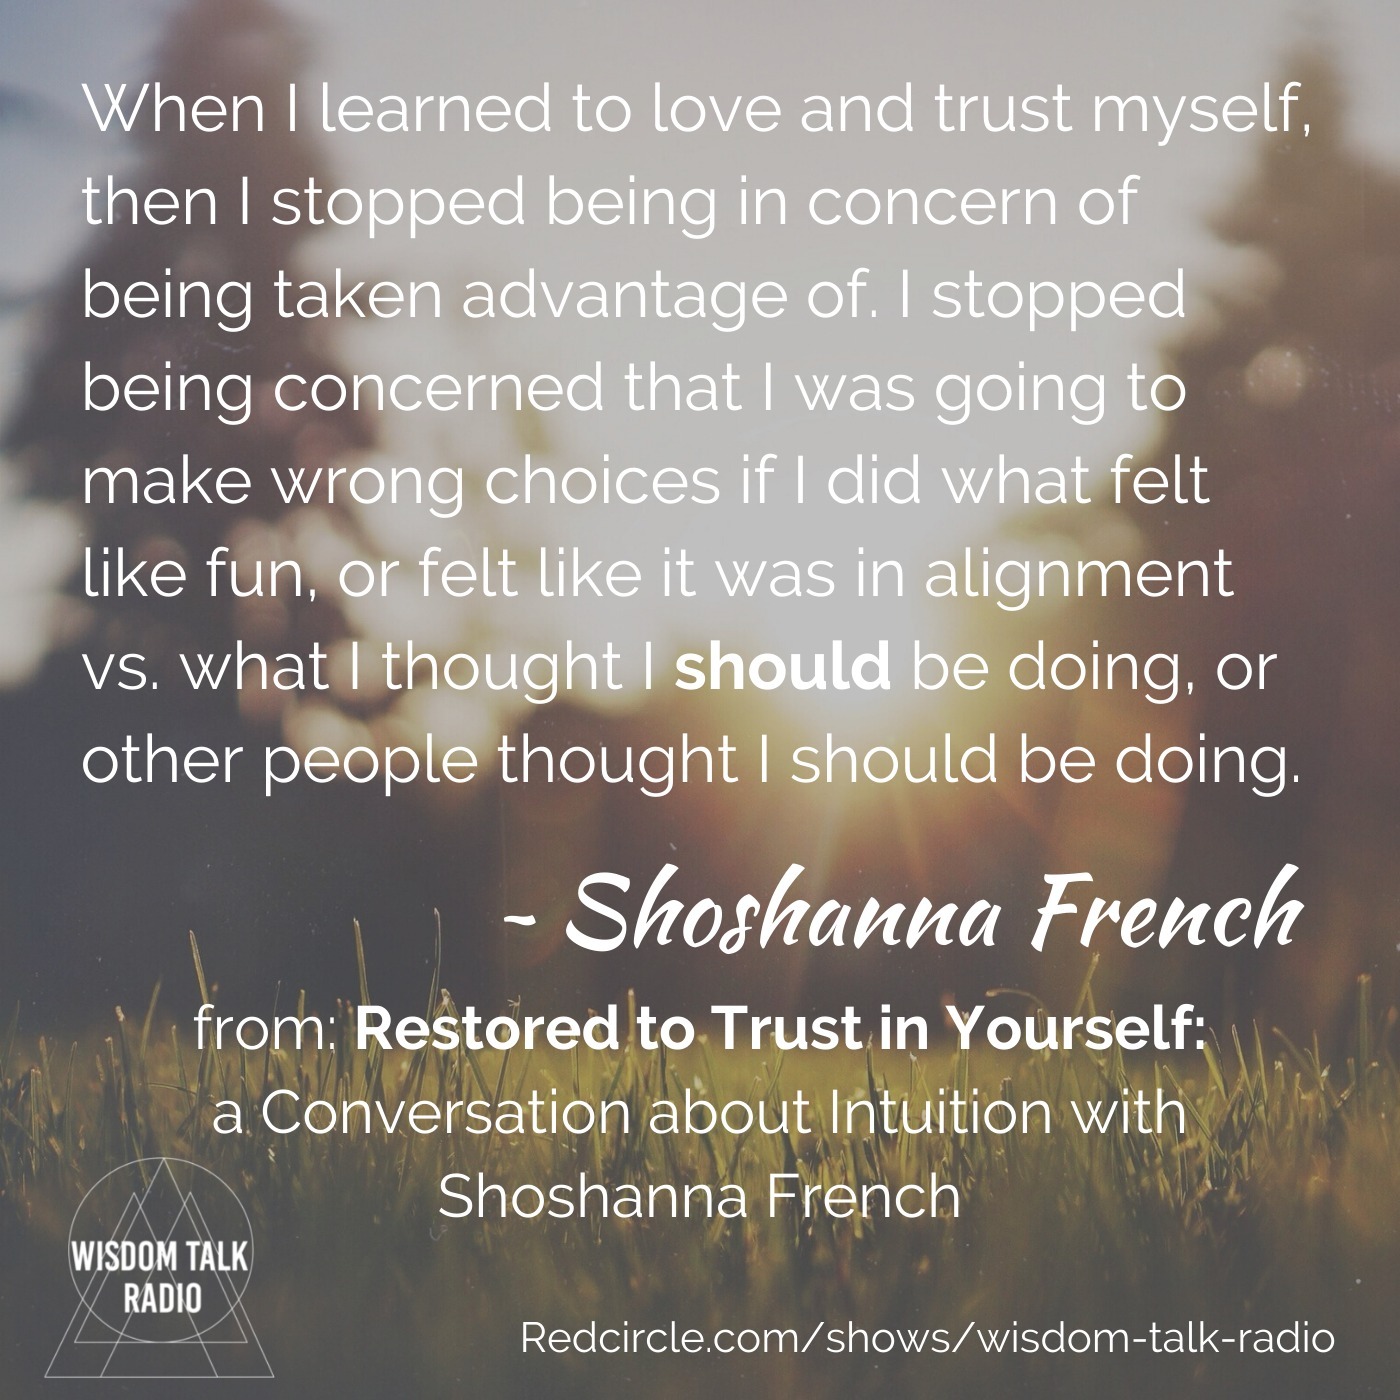 Restored to Trust in Yourself: a conversation with Shoshanna French